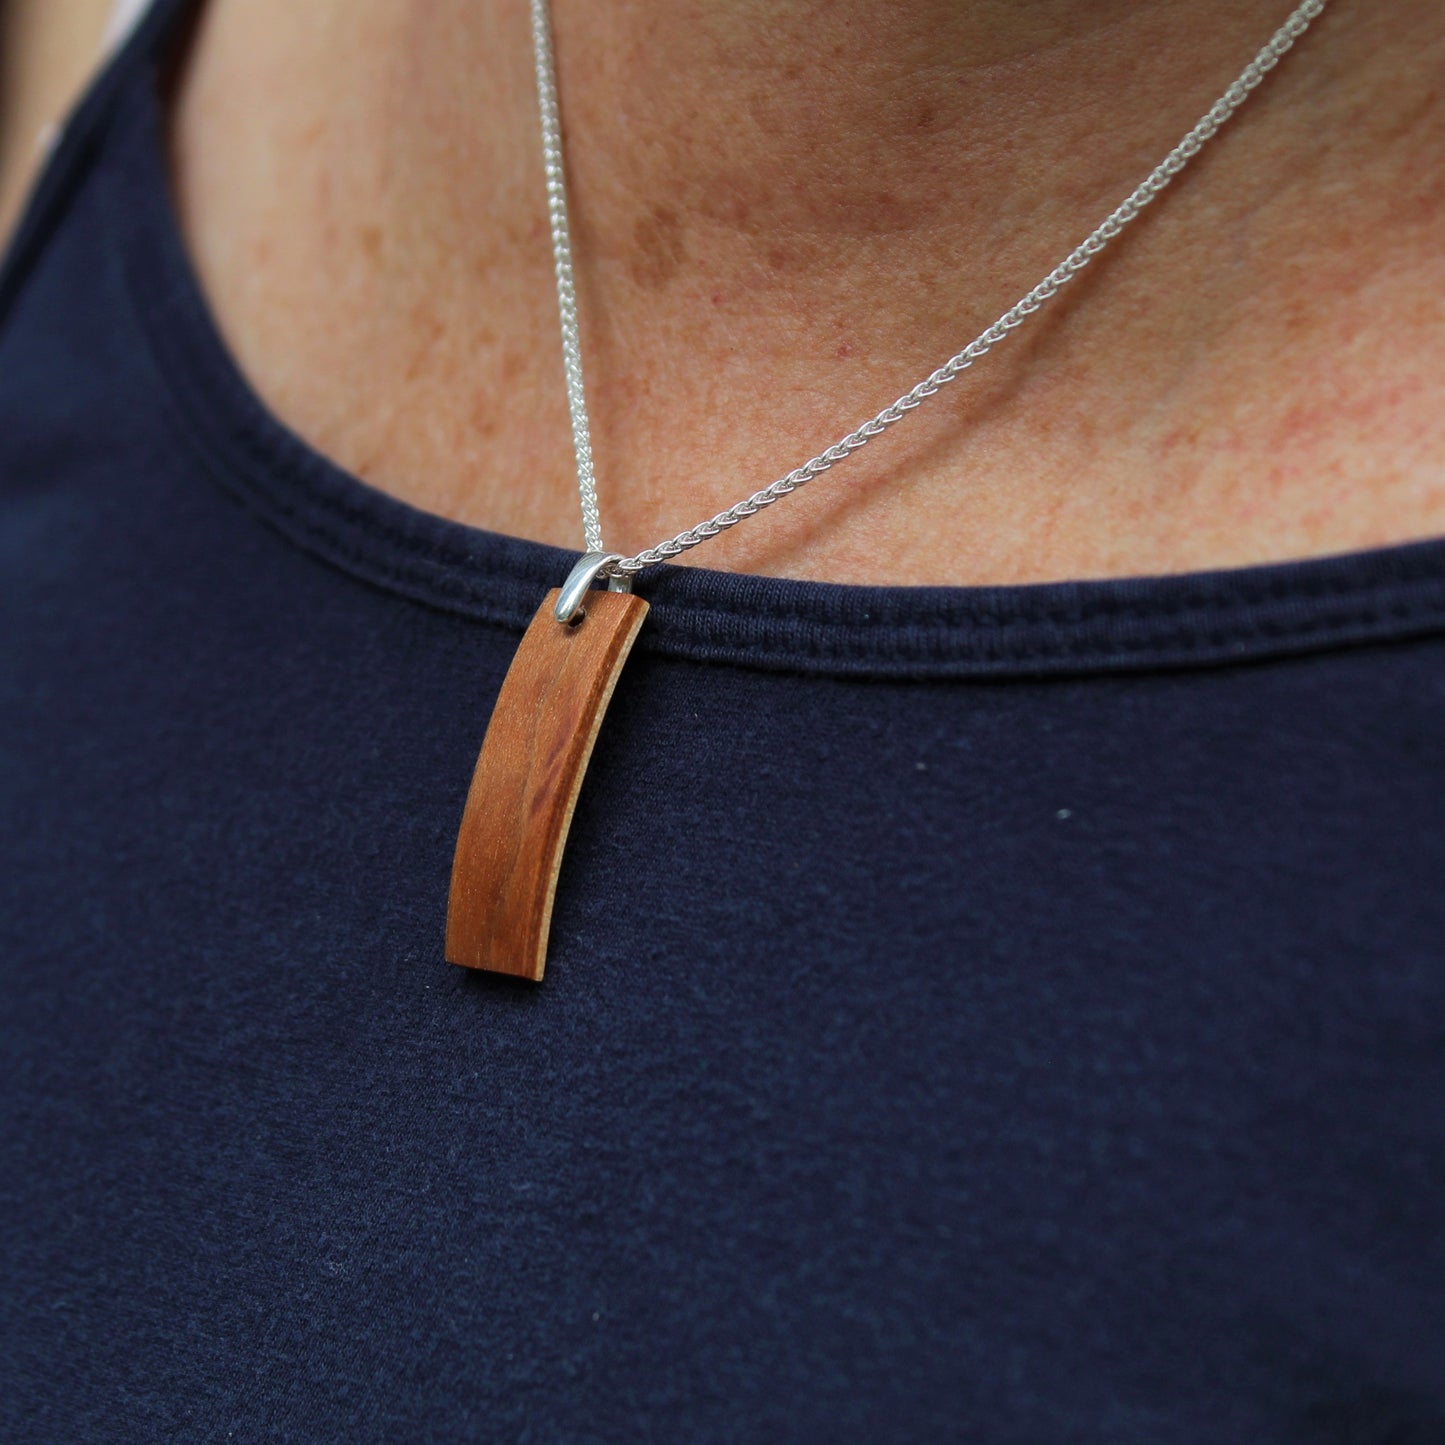 Cherry wood pendant with silver chain